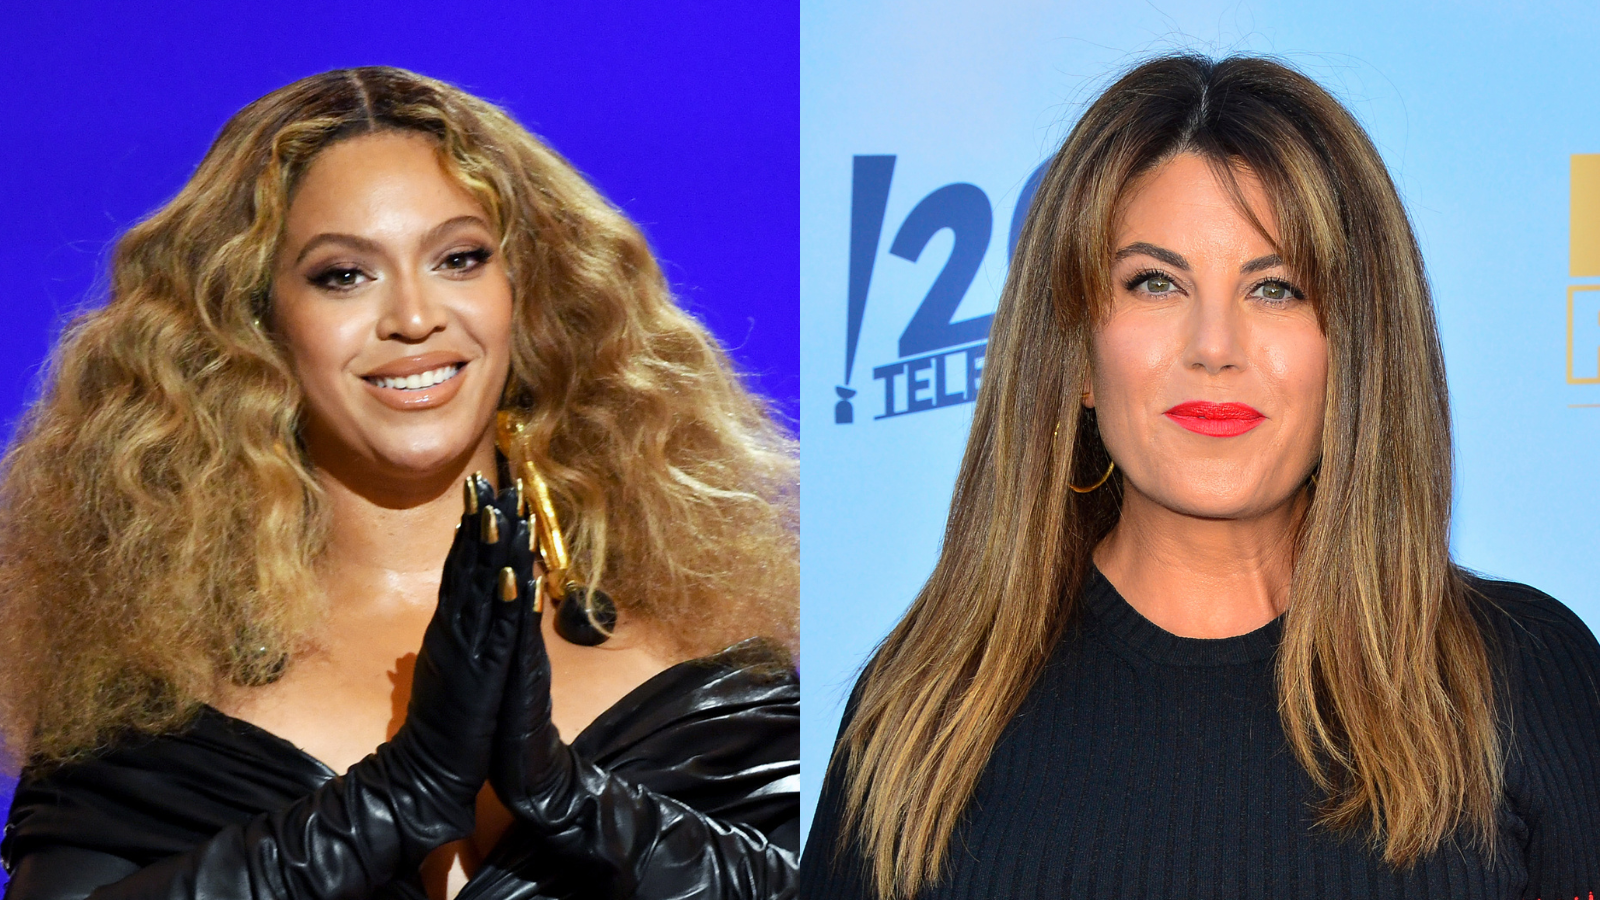 Beyoncé Is Asked By Monica Lewinsky To Take Her Name Out Of The Lyrics Of "Partition"